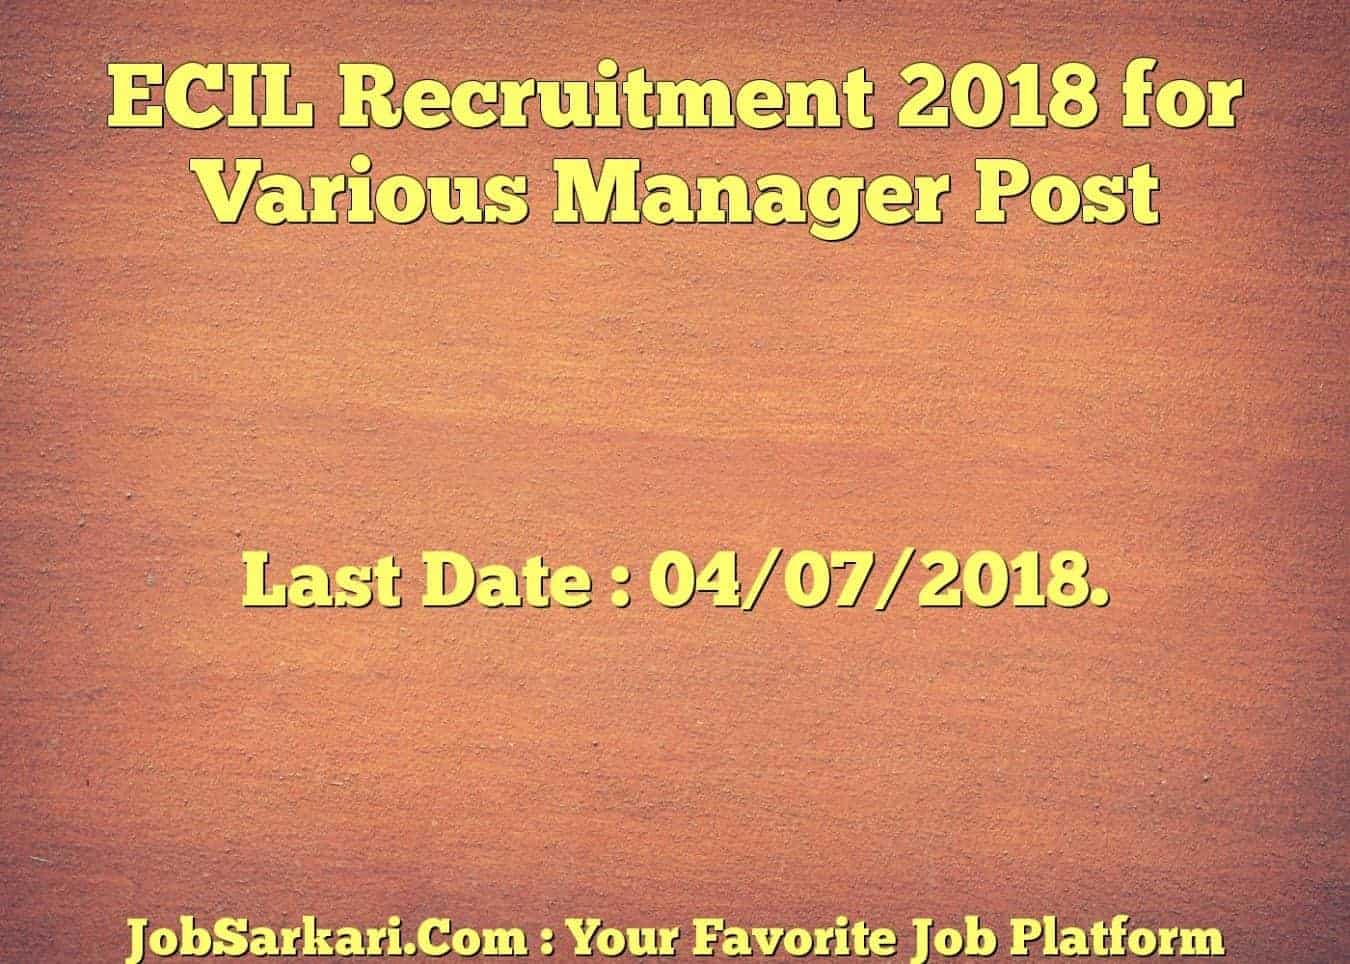 ECIL Recruitment 2018 for Various Manager Post